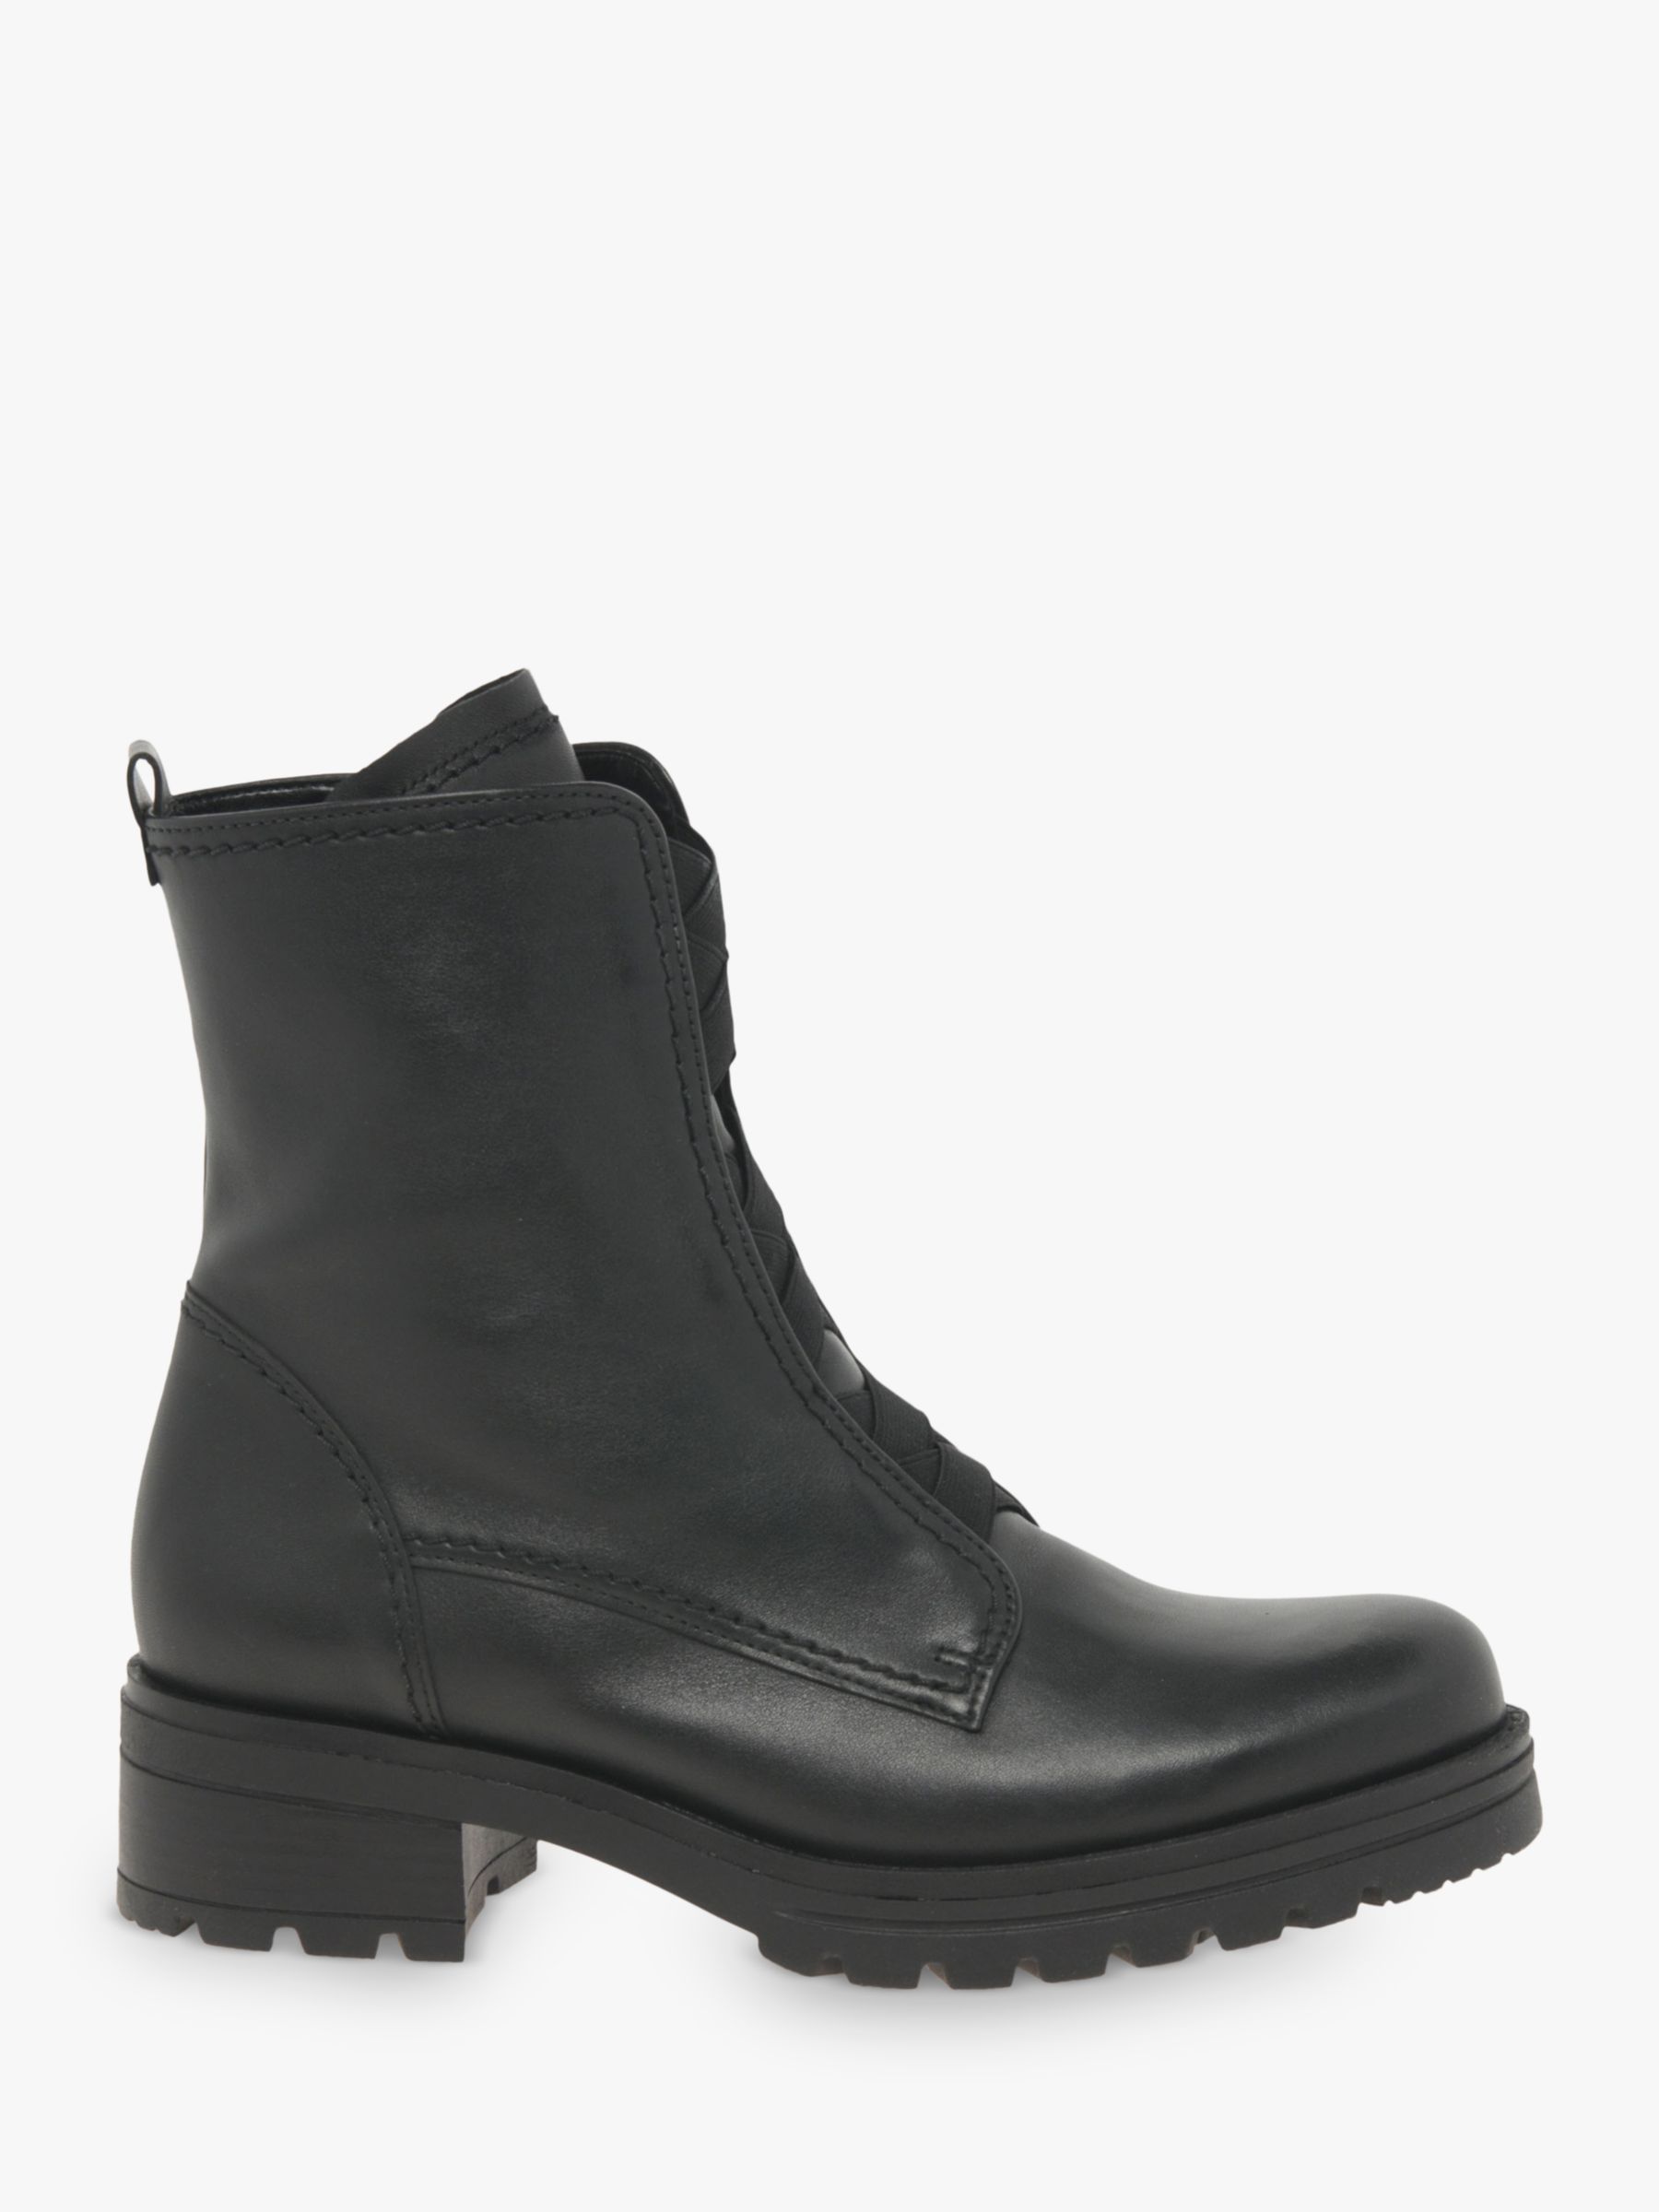 Gabor Sea Wide Fit Leather Biker Boots, Black at John Lewis & Partners